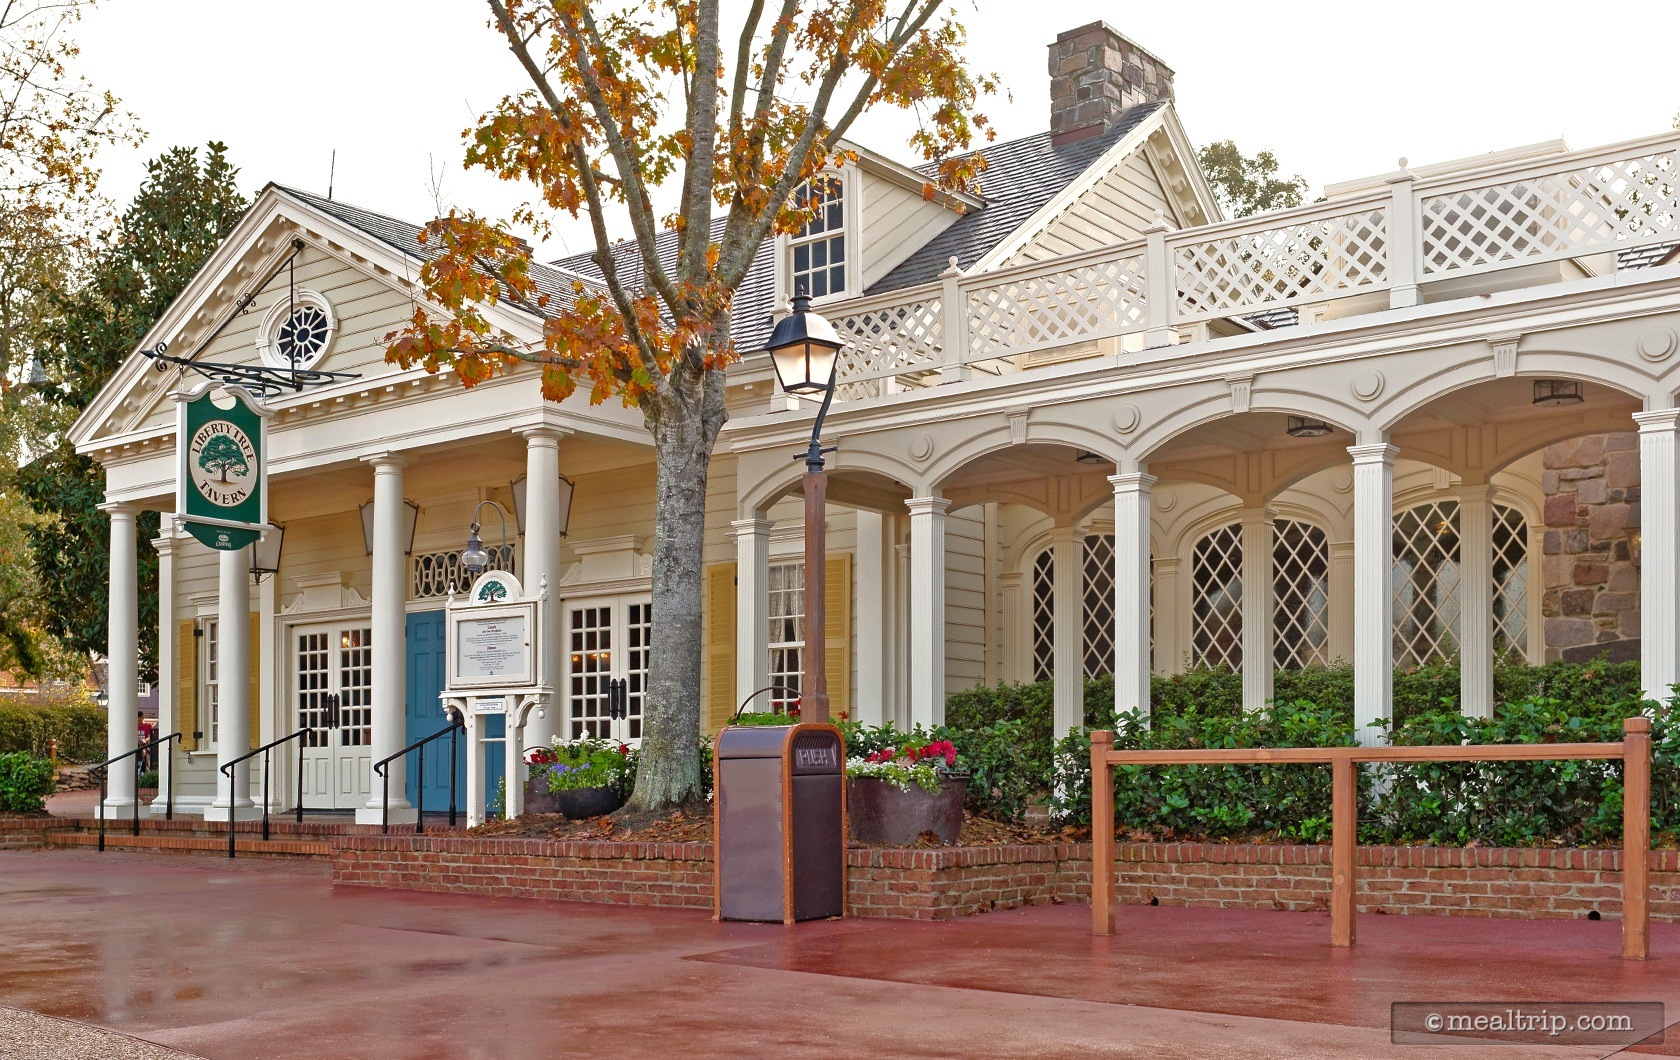 Photo Gallery for Liberty Tree Tavern Lunch at Magic Kingdom